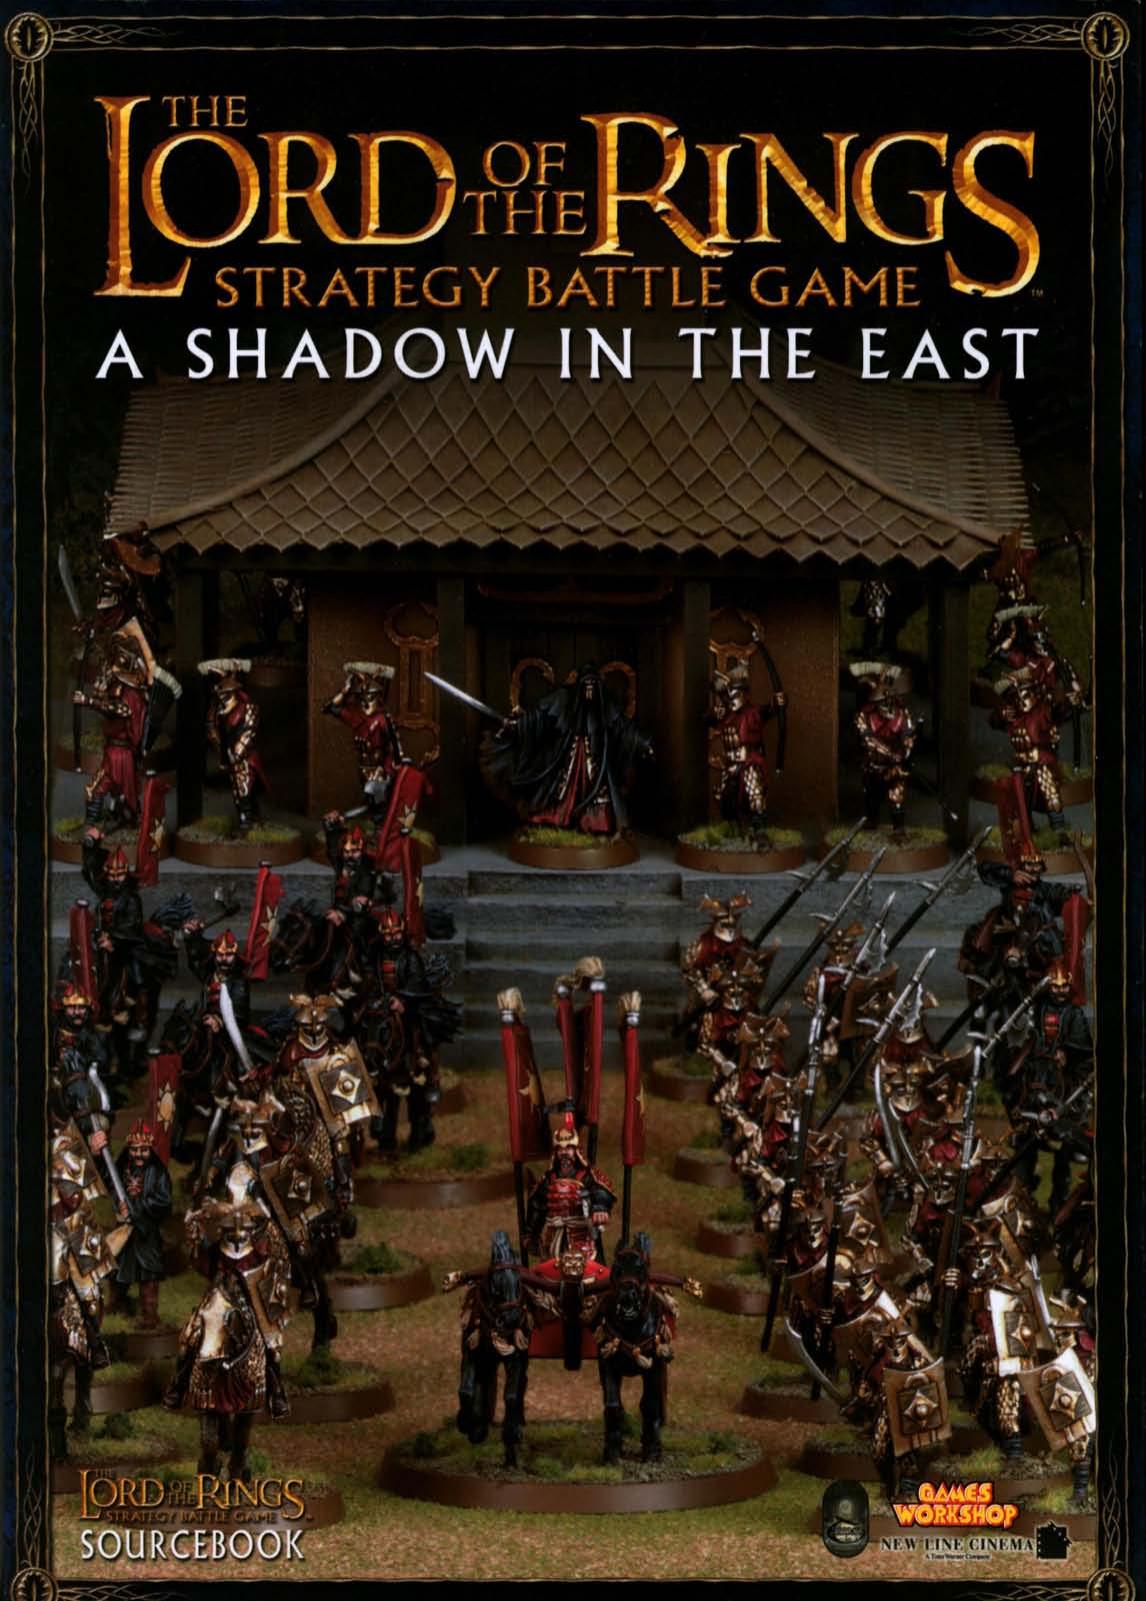 A Shadow in the East